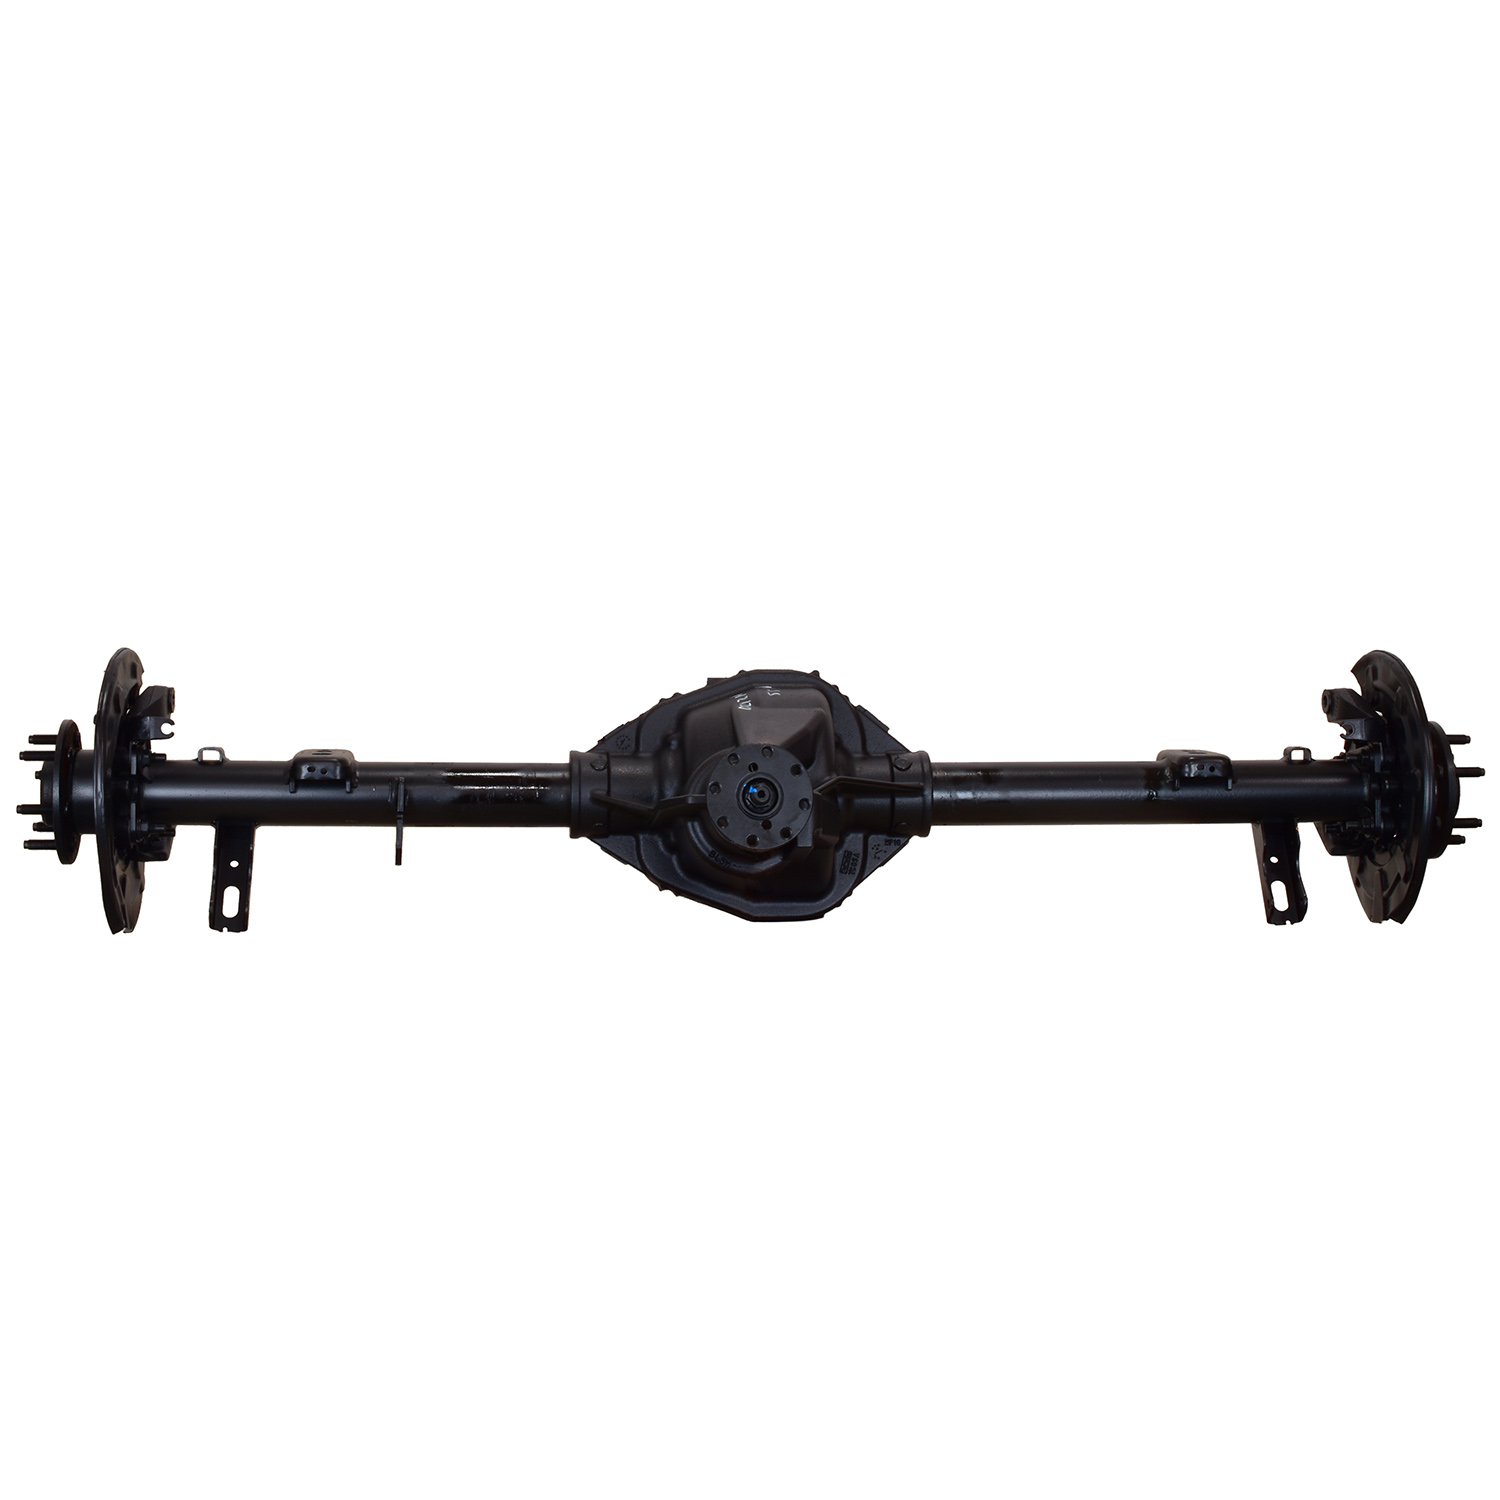 FORD F-150 LCK 4.88 AXLE